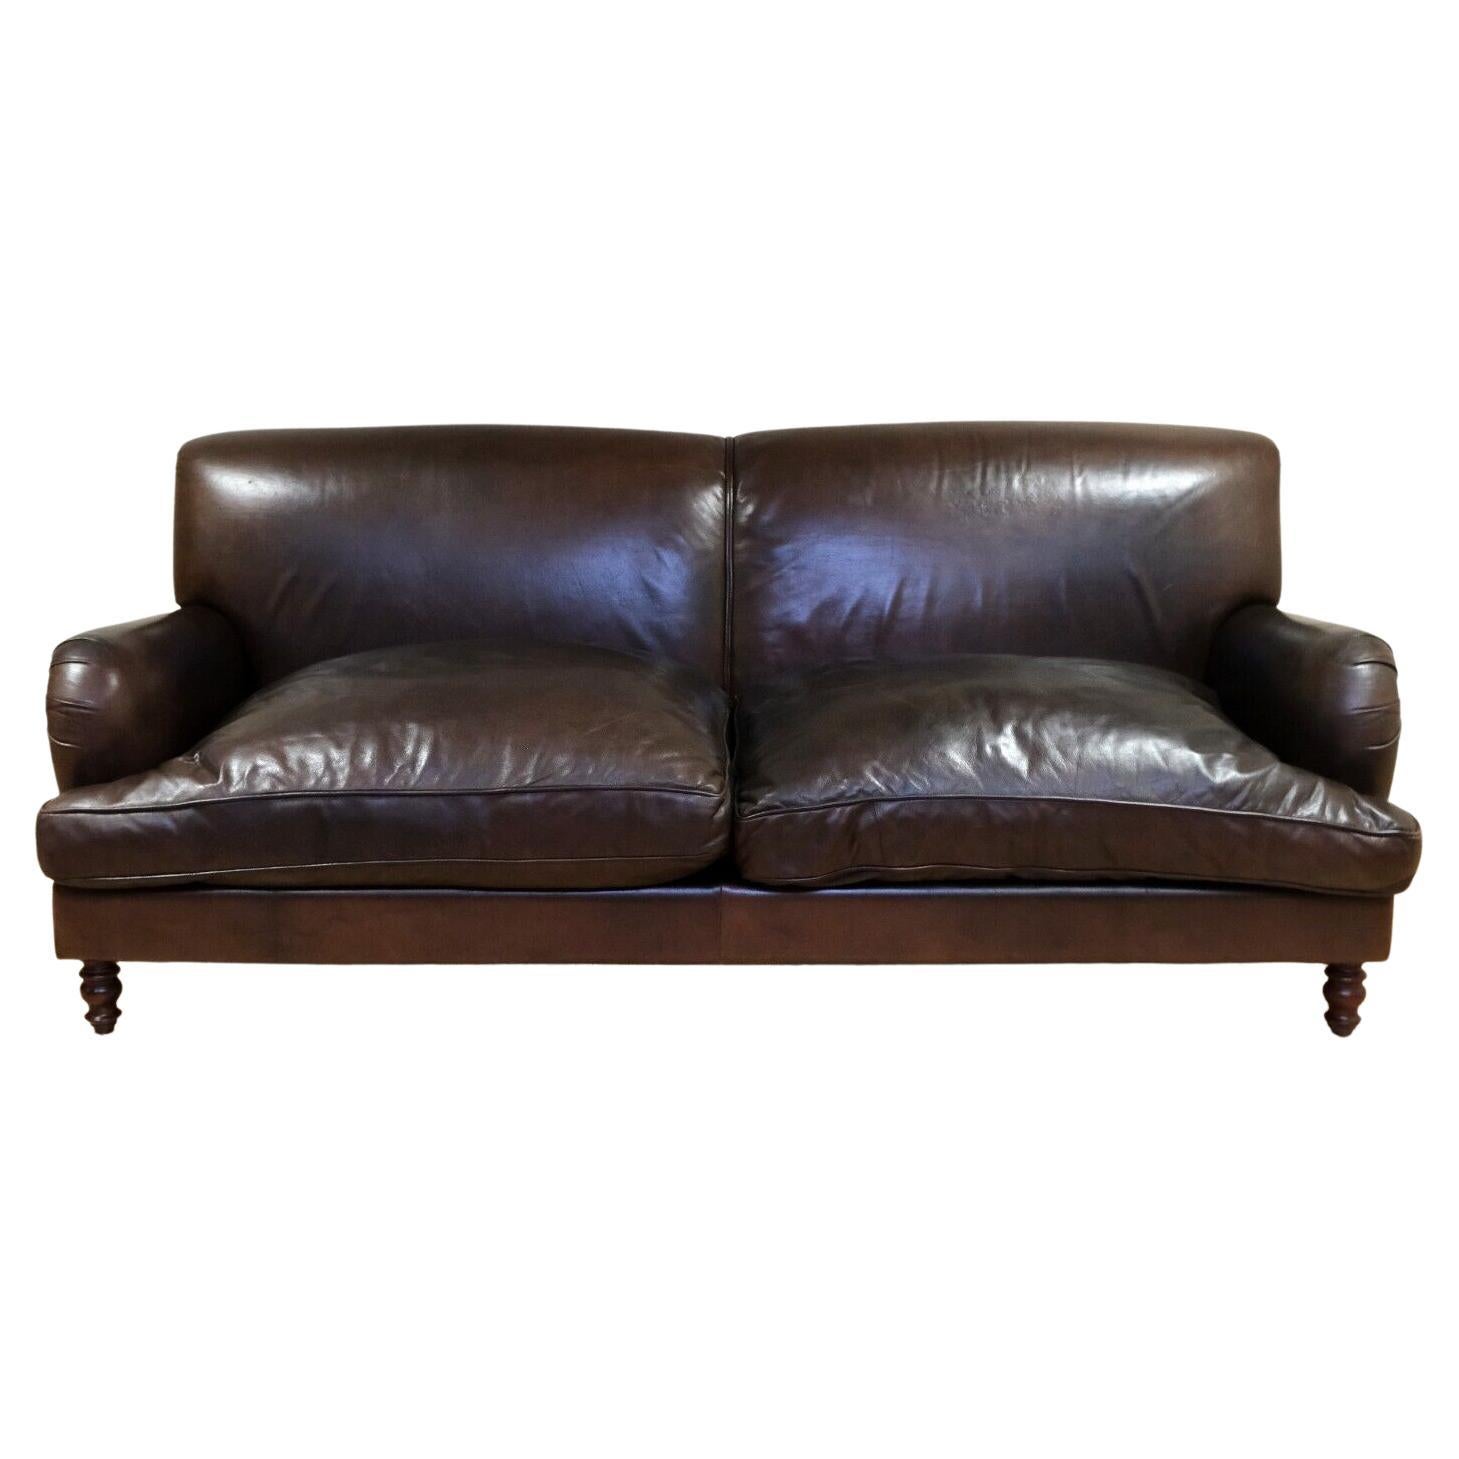 We are delighted to offer for sale this elegant Vintage Howard style brown leather three seater sofa with reversible cushions.

This elegant and well made sofa is comes with a generous seating area, giving its comfortable feel for three people. This